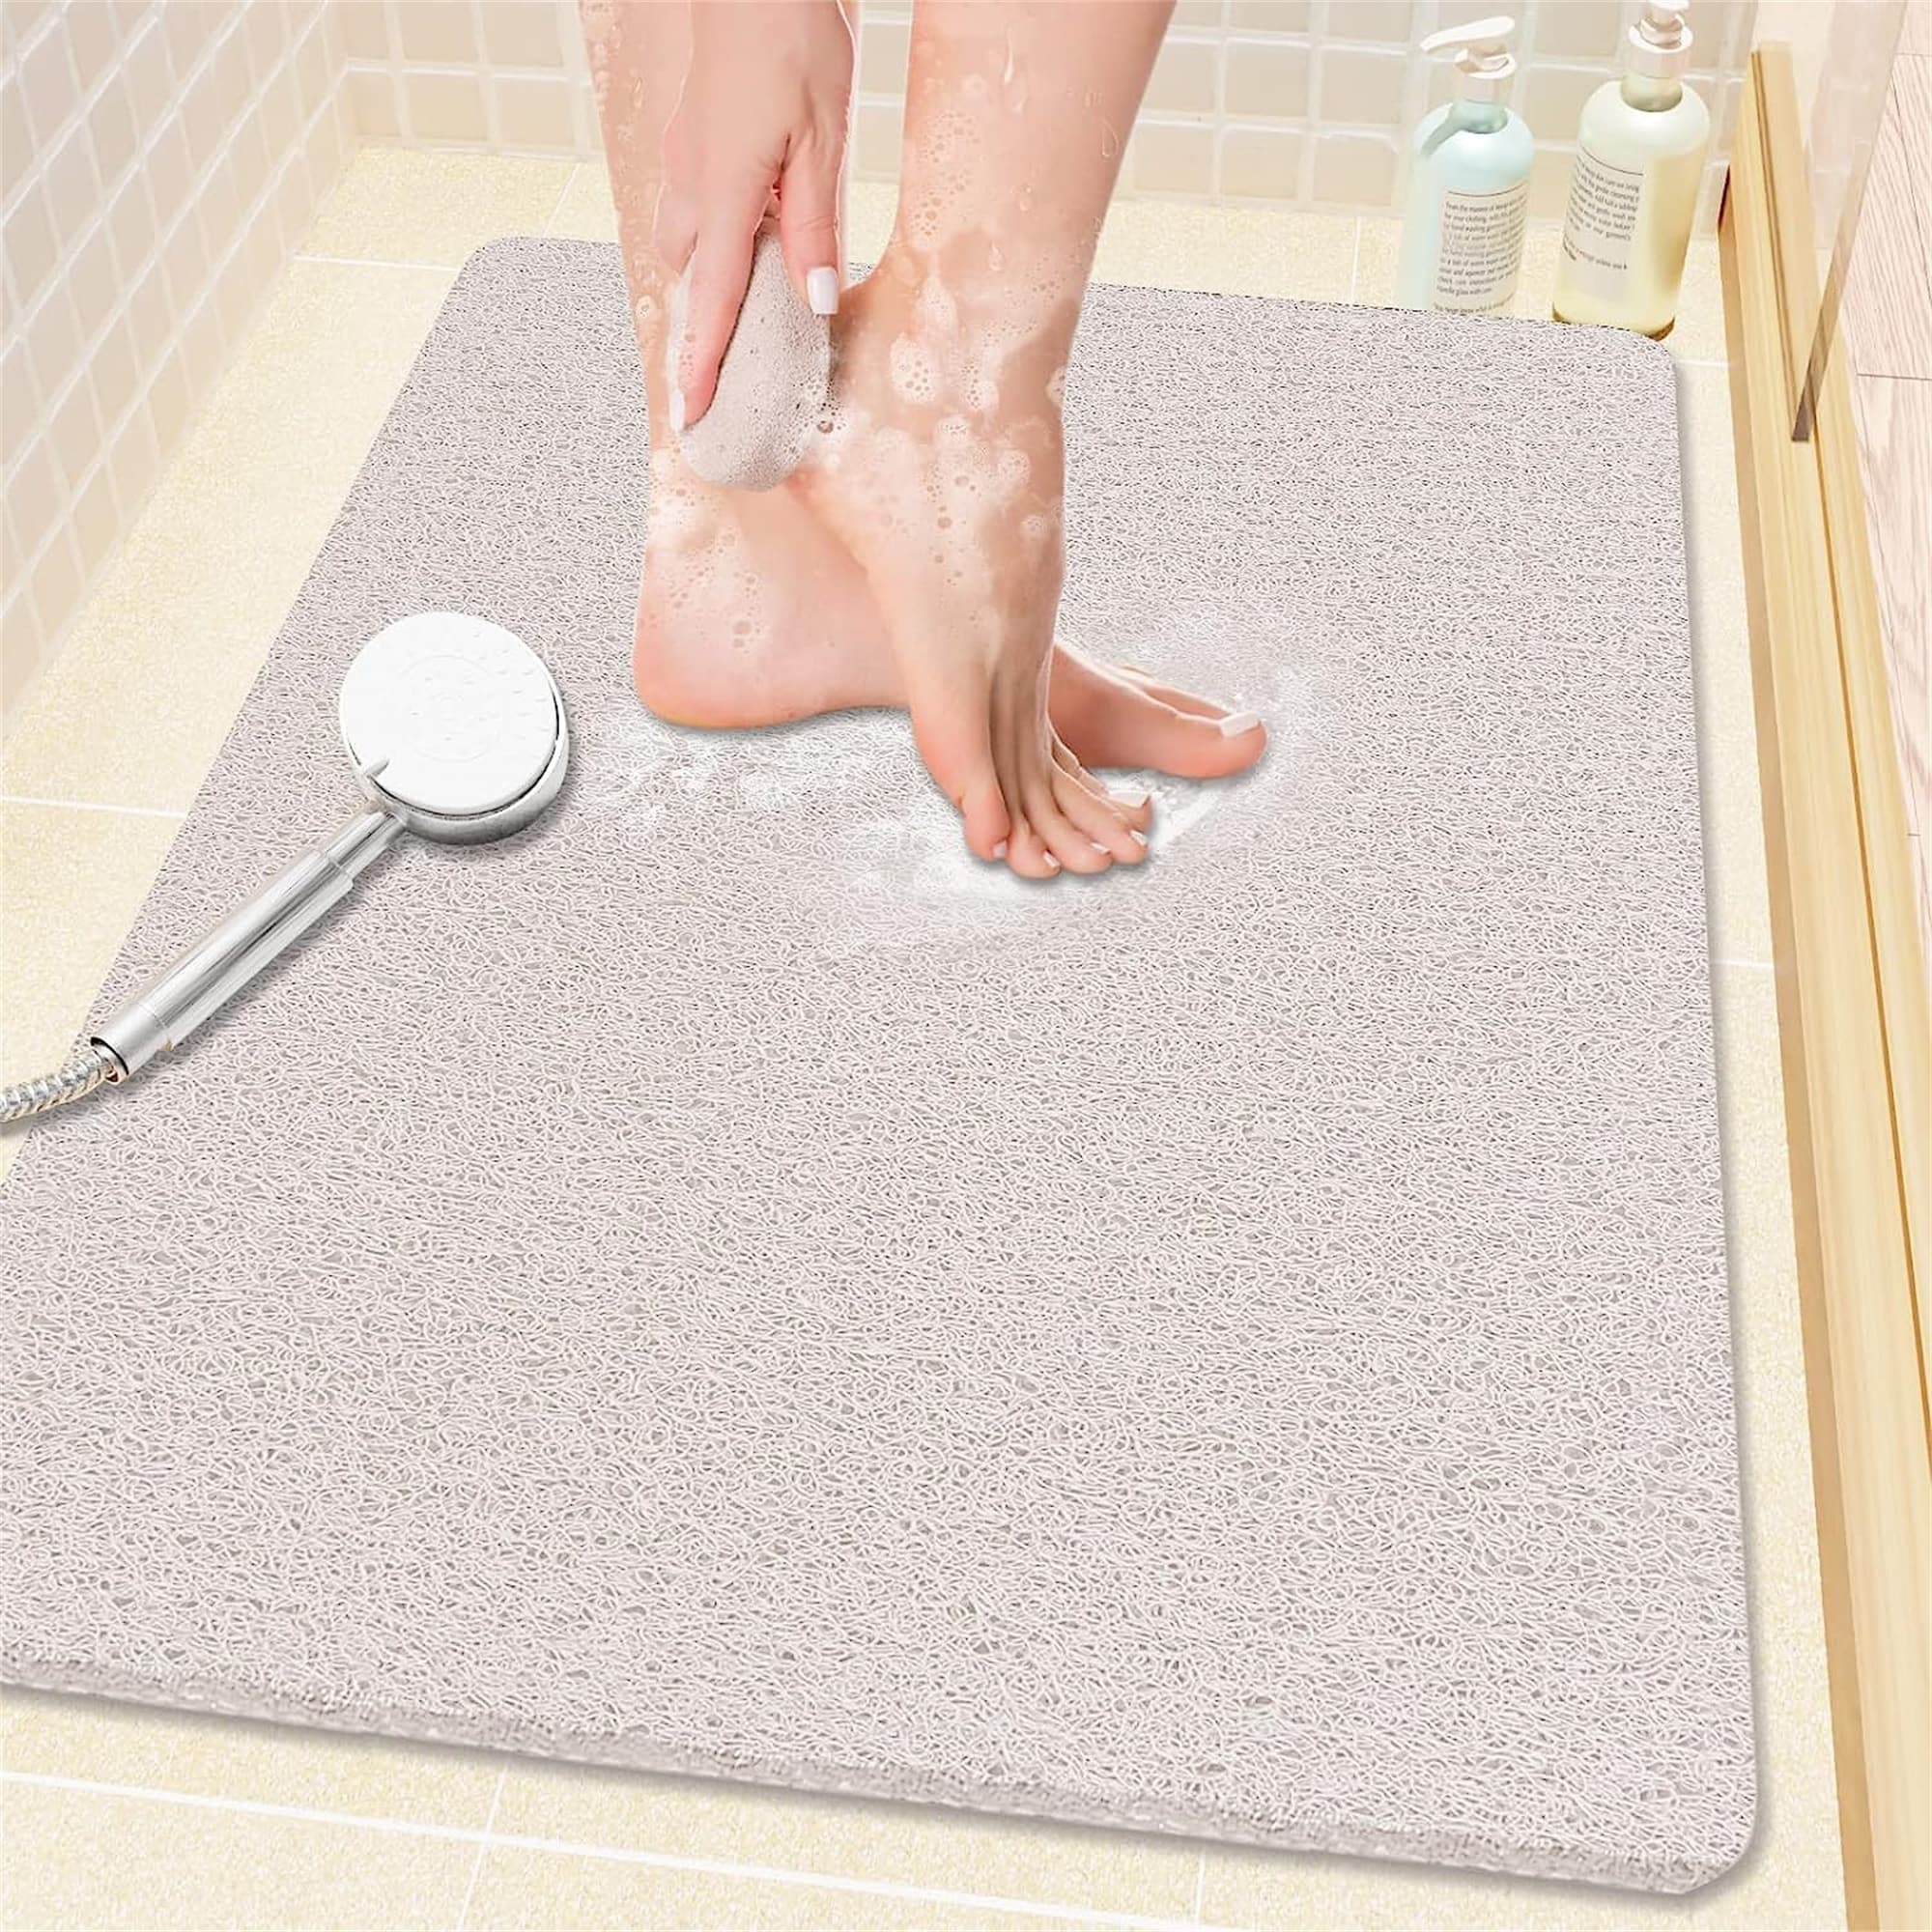 https://ak1.ostkcdn.com/images/products/is/images/direct/a0f16c8a4858a9703dbe3de46473f0d9496fb6e6/Bathtub-Mat-Non-Slip.jpg